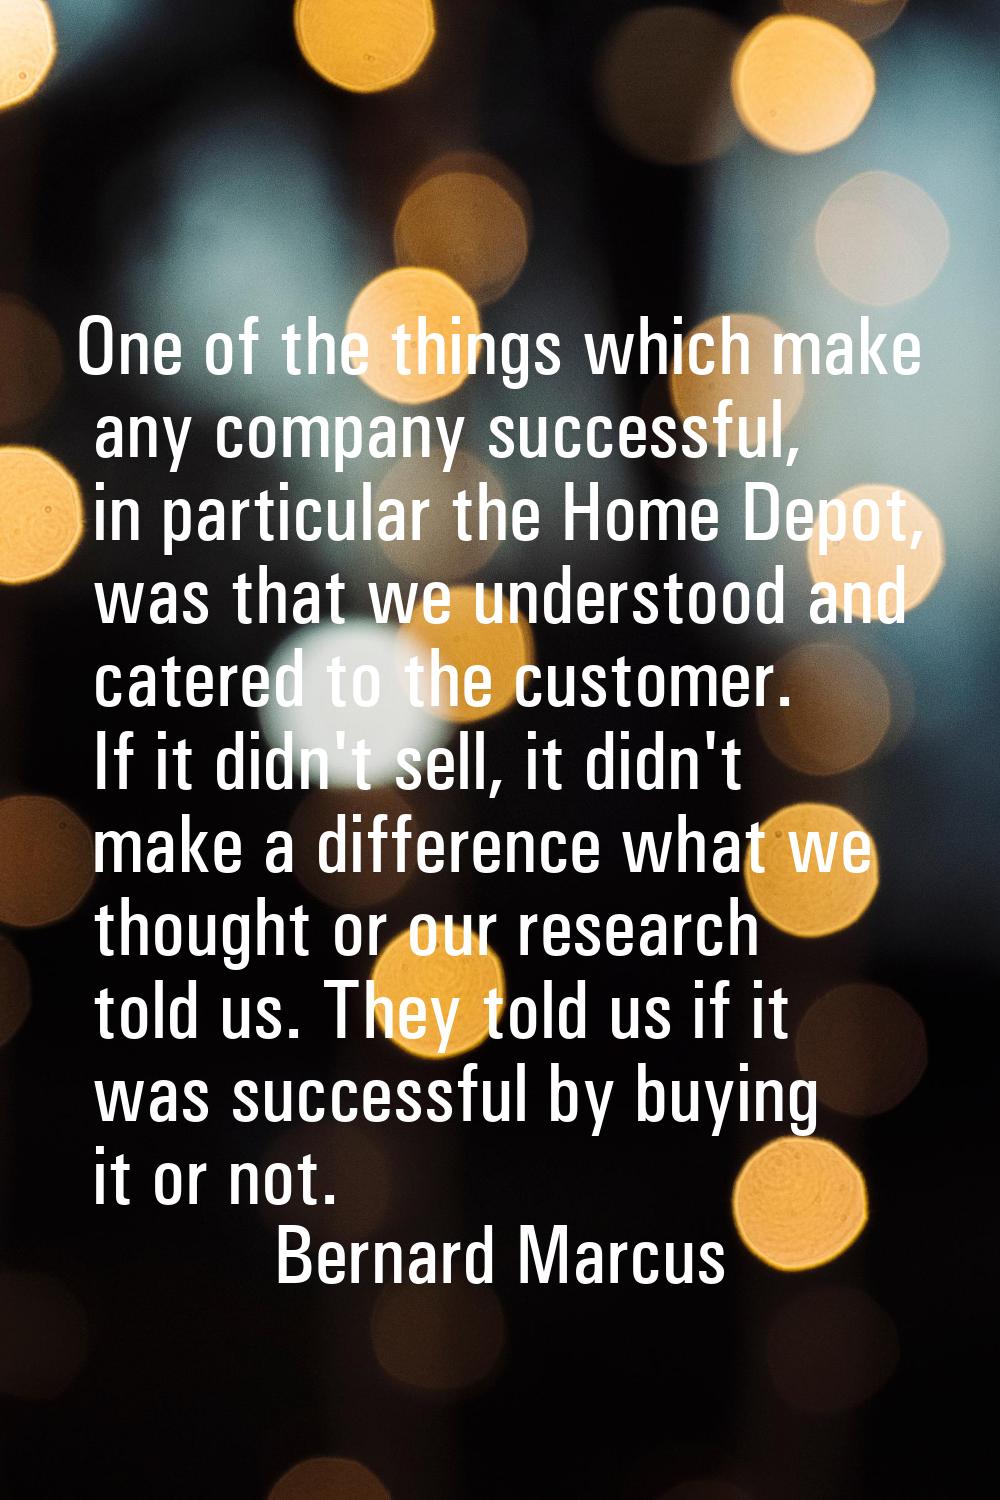 One of the things which make any company successful, in particular the Home Depot, was that we unde